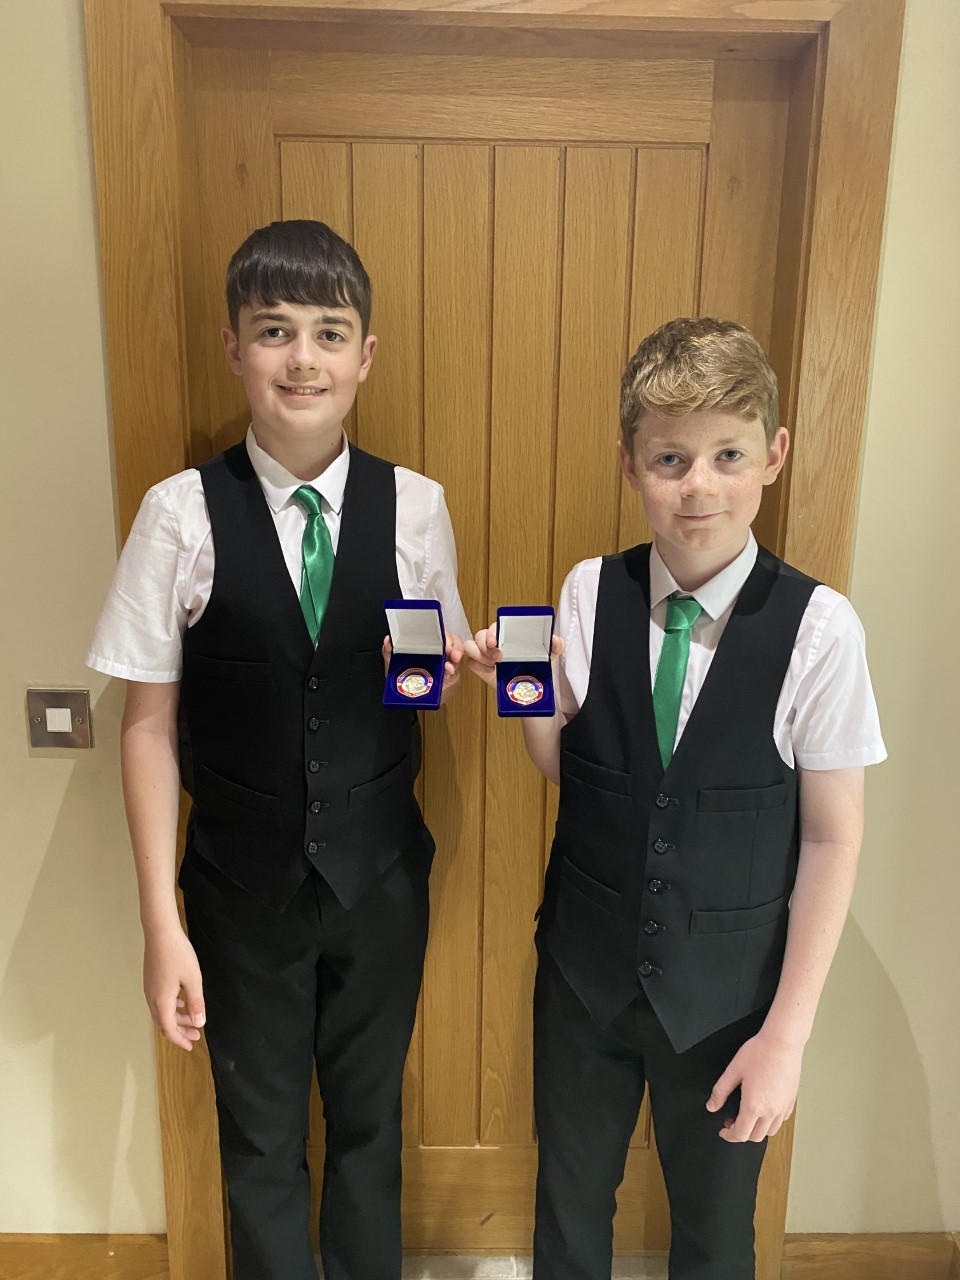 Ulster Champions brothers Seán and Conor McAleer, Irvinestown CCÉ. Seán came 1st in 12-15 Lilting and 3rd 12-15 Accompaniment. Conor came 1st in U12 Melodeon, 2nd U12 Accompaniment, 2nd U12 Whistling and 2nd U12 Lilting at the Ulster